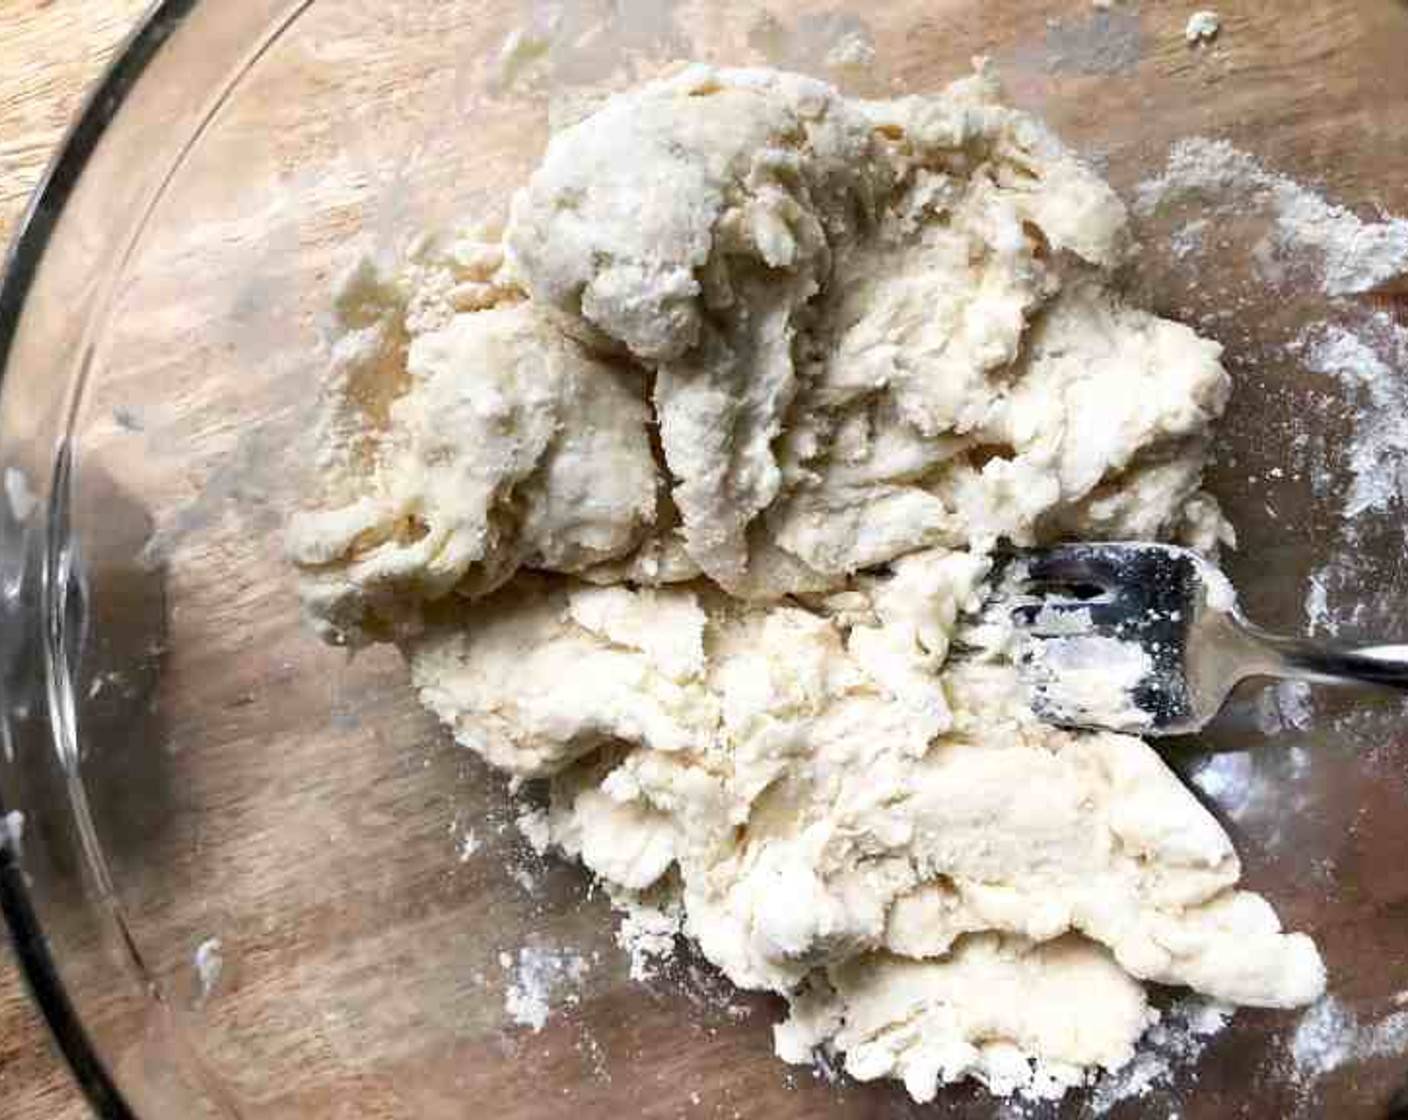 step 2 In a mixing bowl, stir together the Unbleached All Purpose Flour (1 1/4 cups) and Kosher Salt (1/4 tsp).  Using a pastry blender, cut in the Vegetable Shortening (1/3 cup) until you create pea-sized pieces.